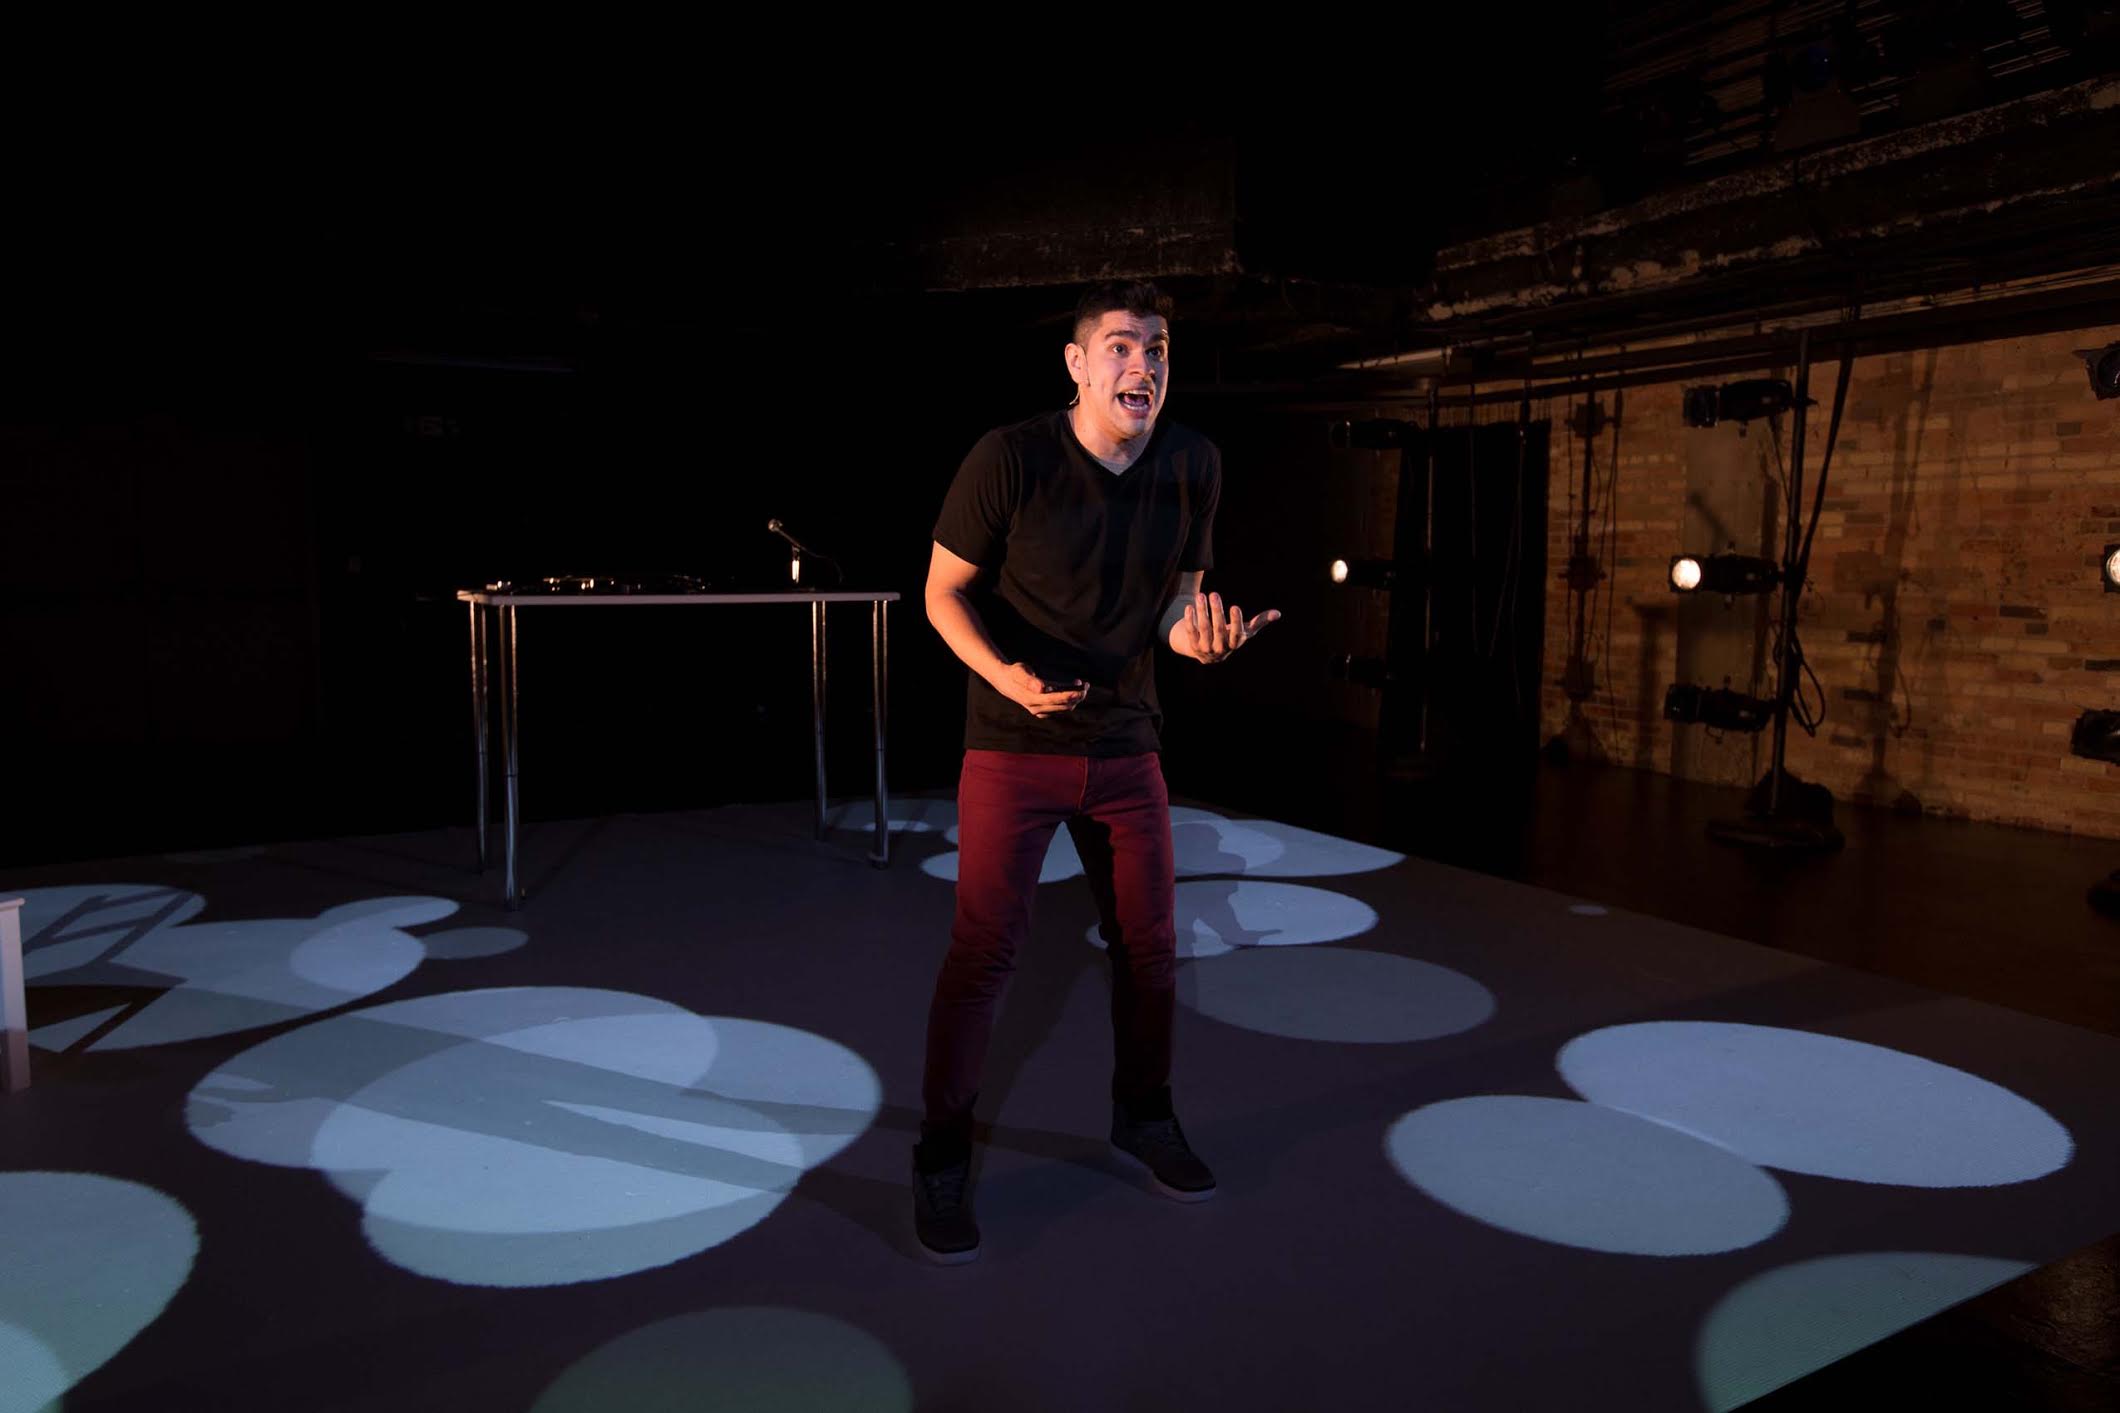 standing amid pools of light, Brian Quijada gestures energetically while speaking